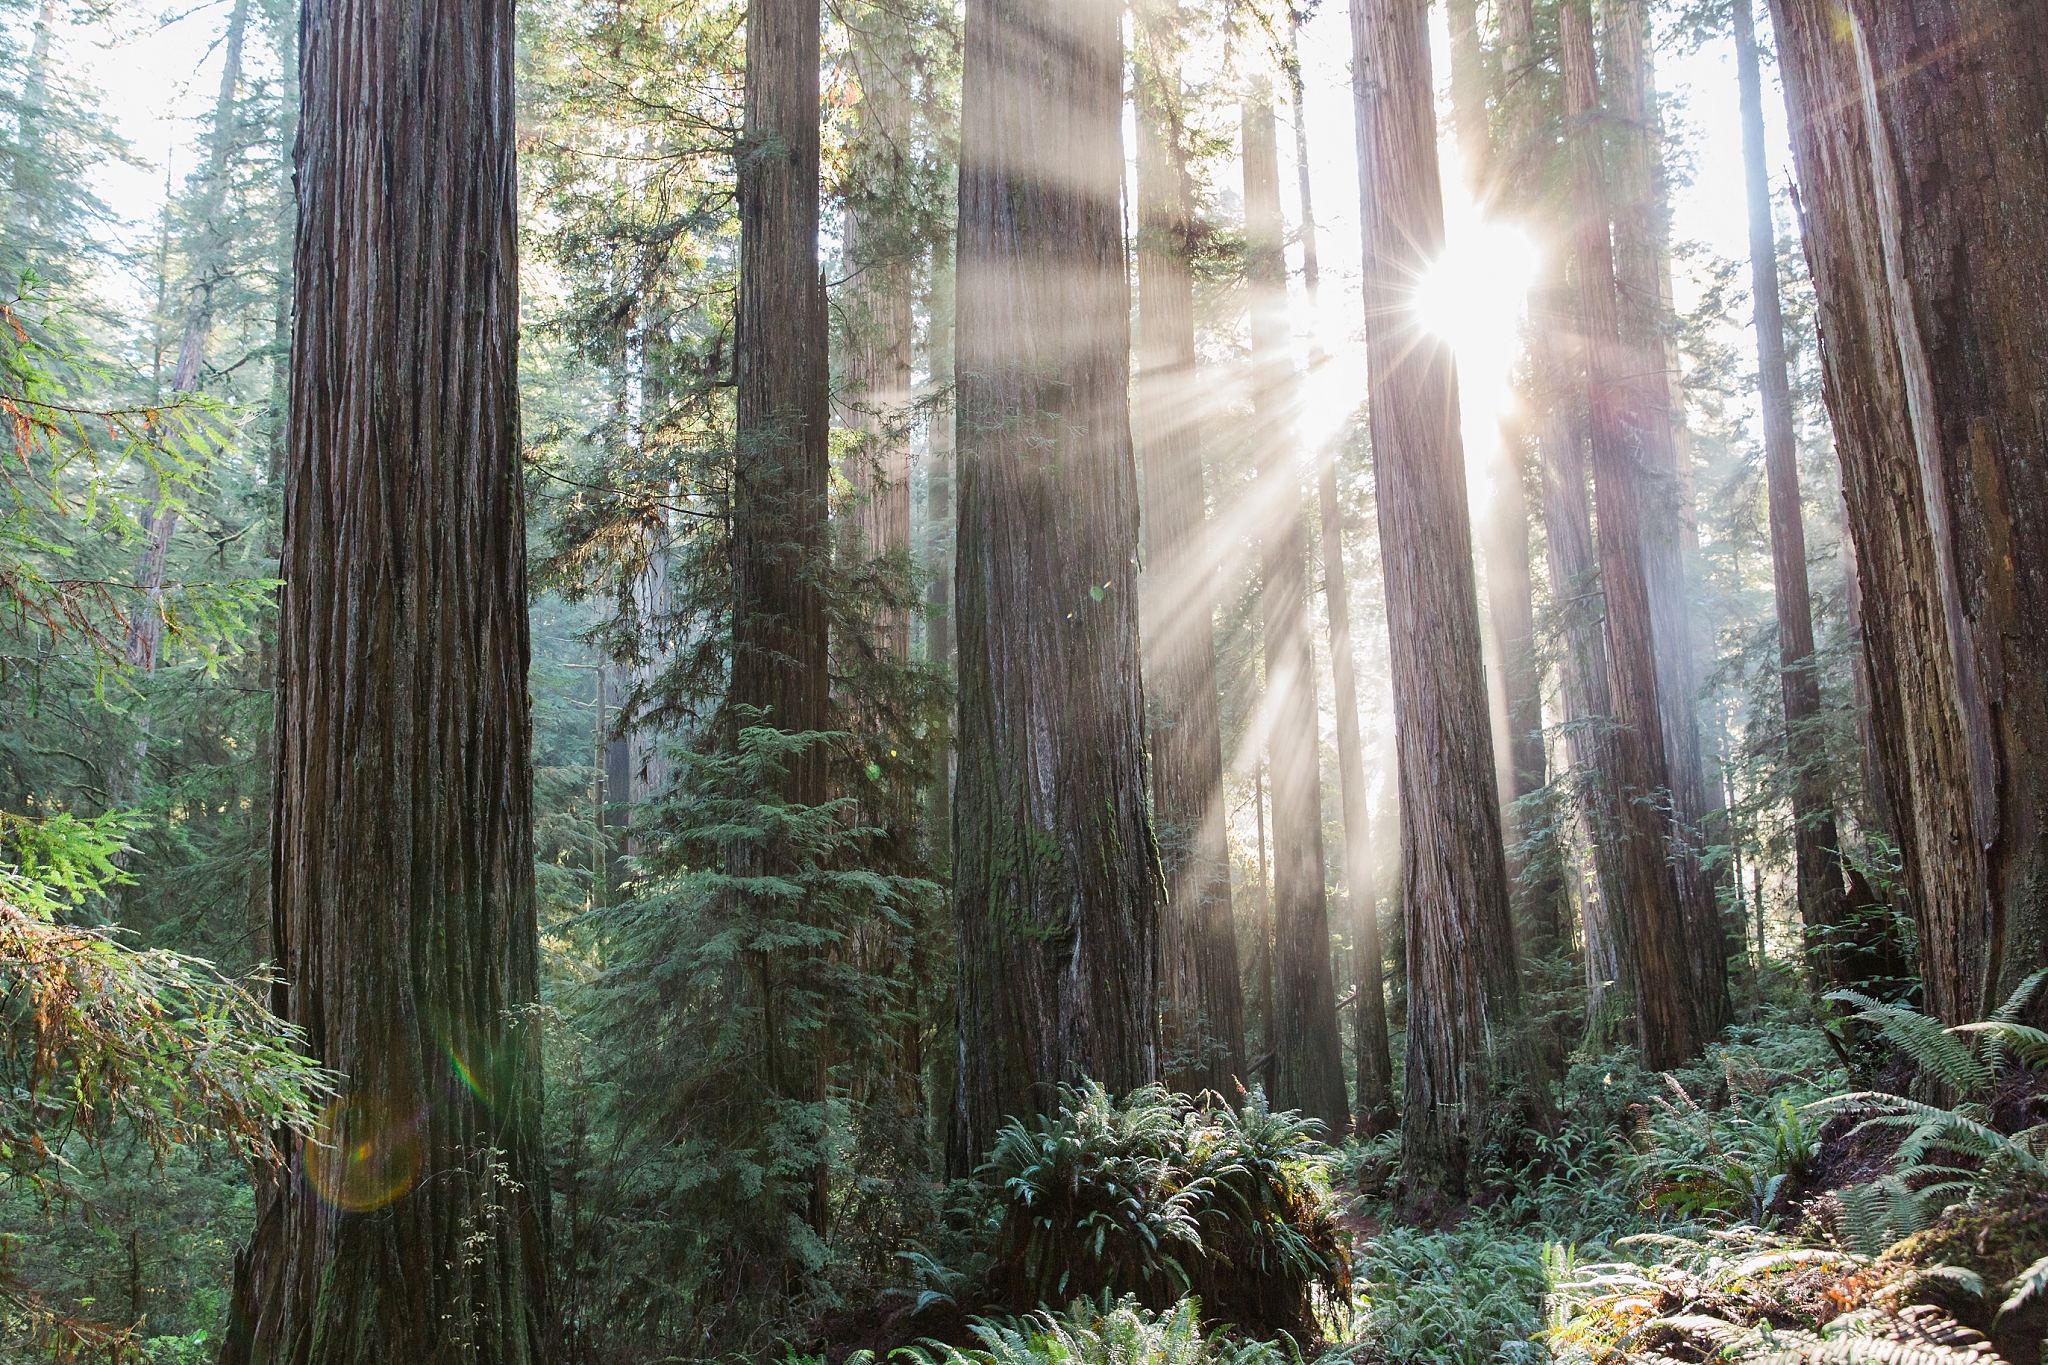 The sun shines through the tall trees in California's Redwood National Forest. | Erica Swantek Photography